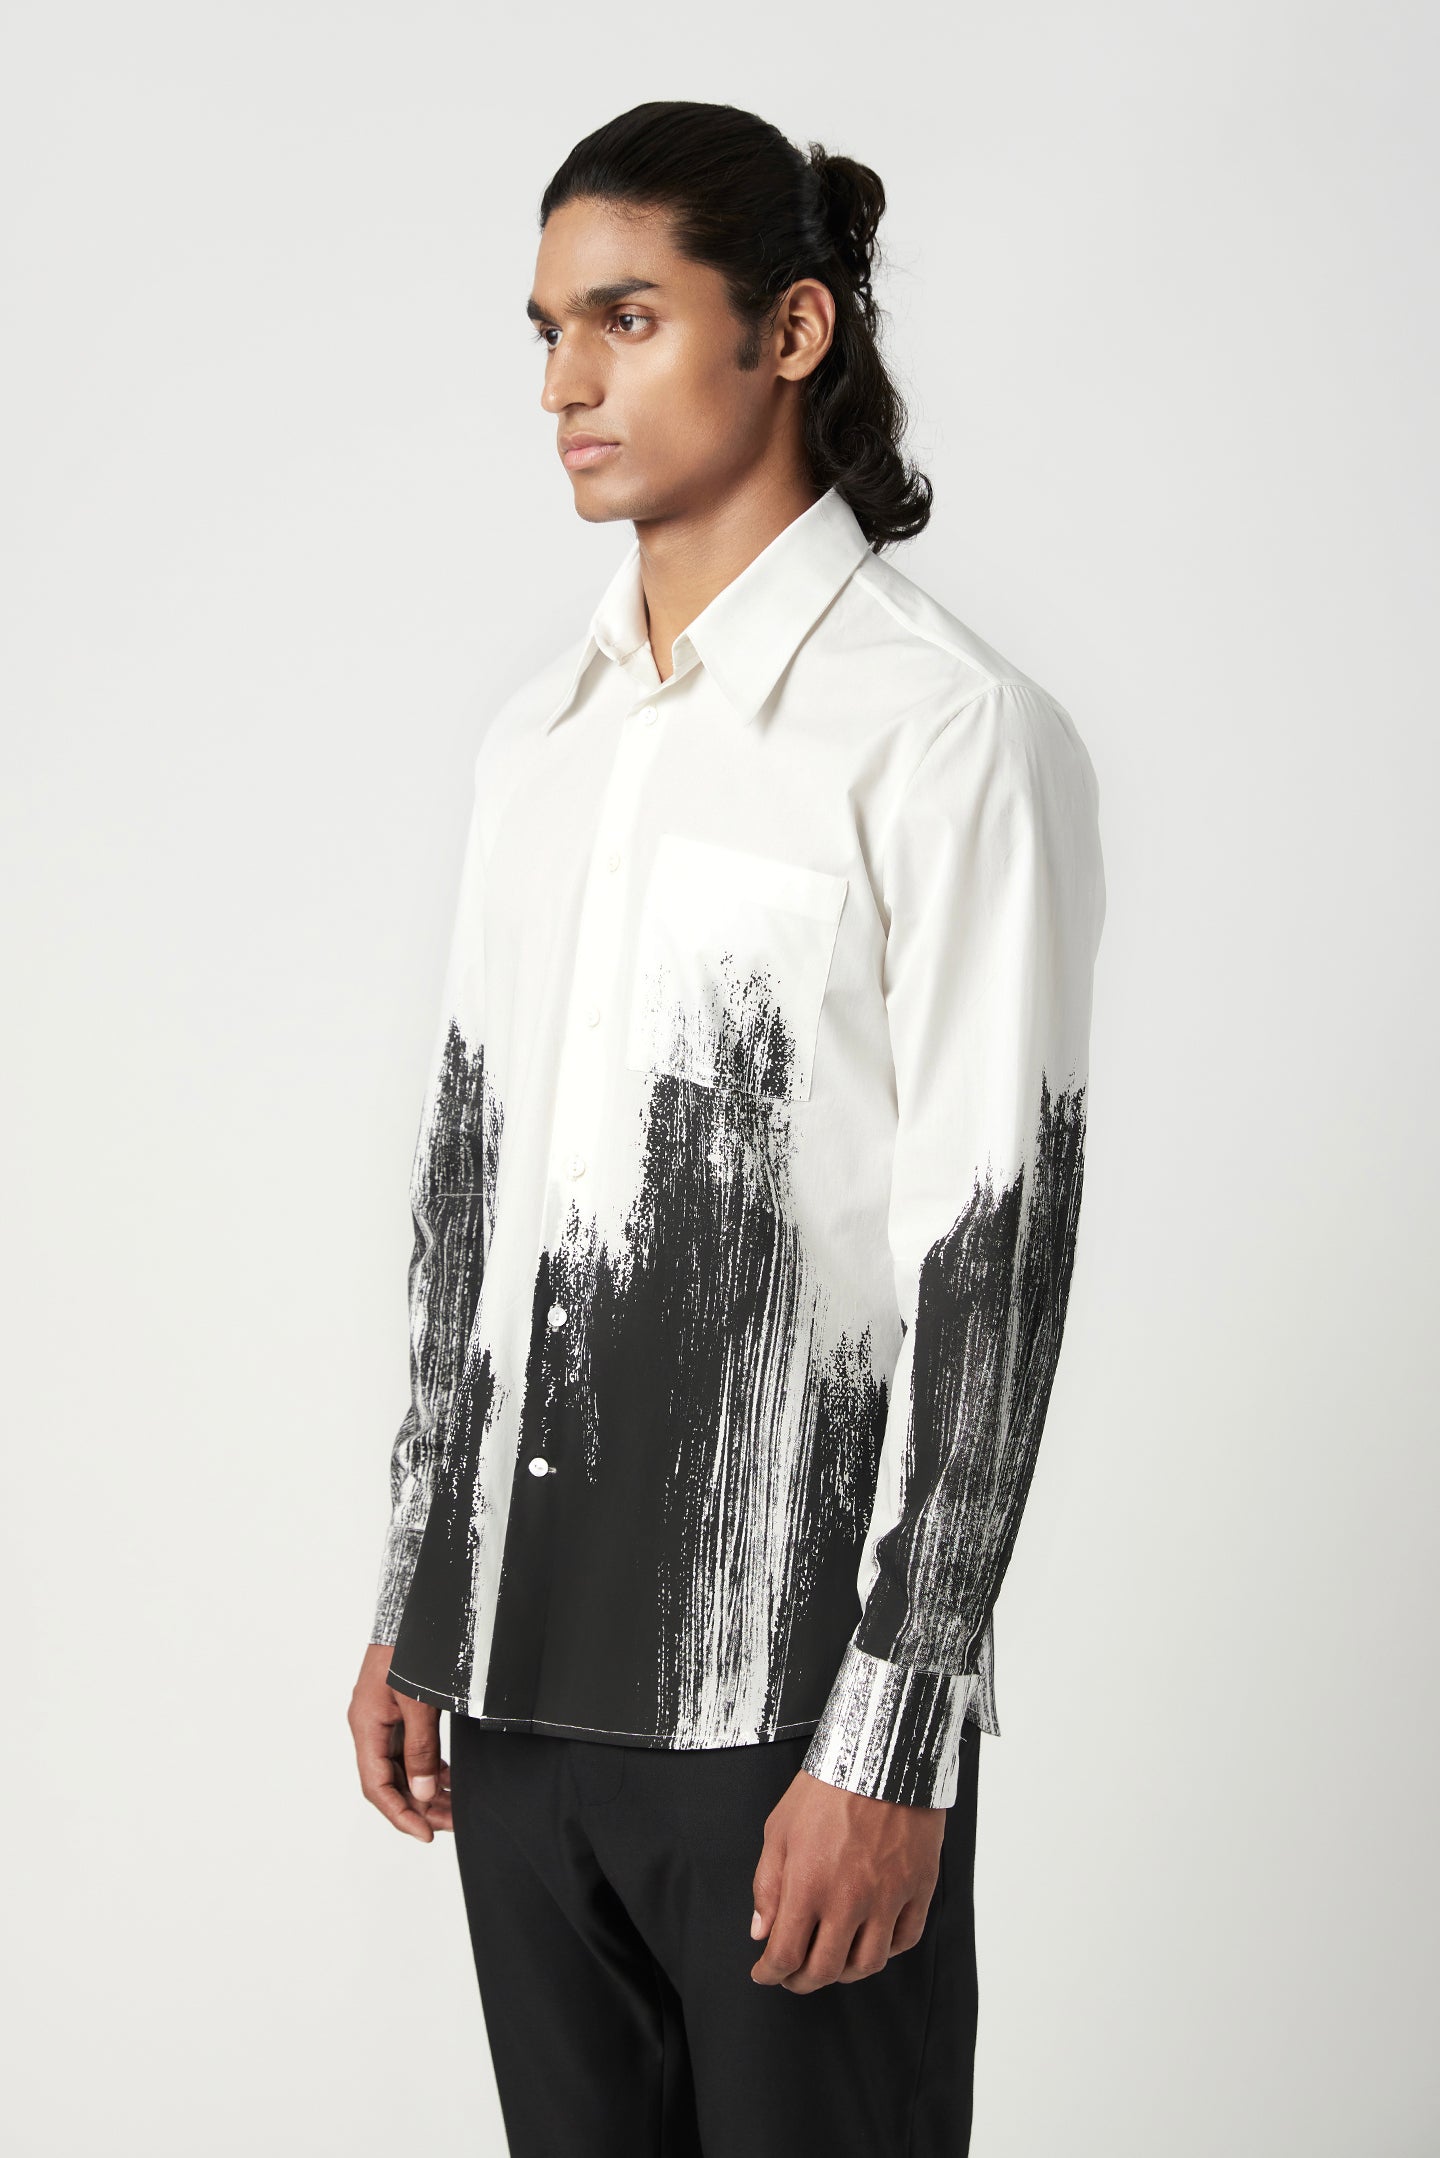 Classic Fit Button-Down Shirt with Brush Stroke Print Placement